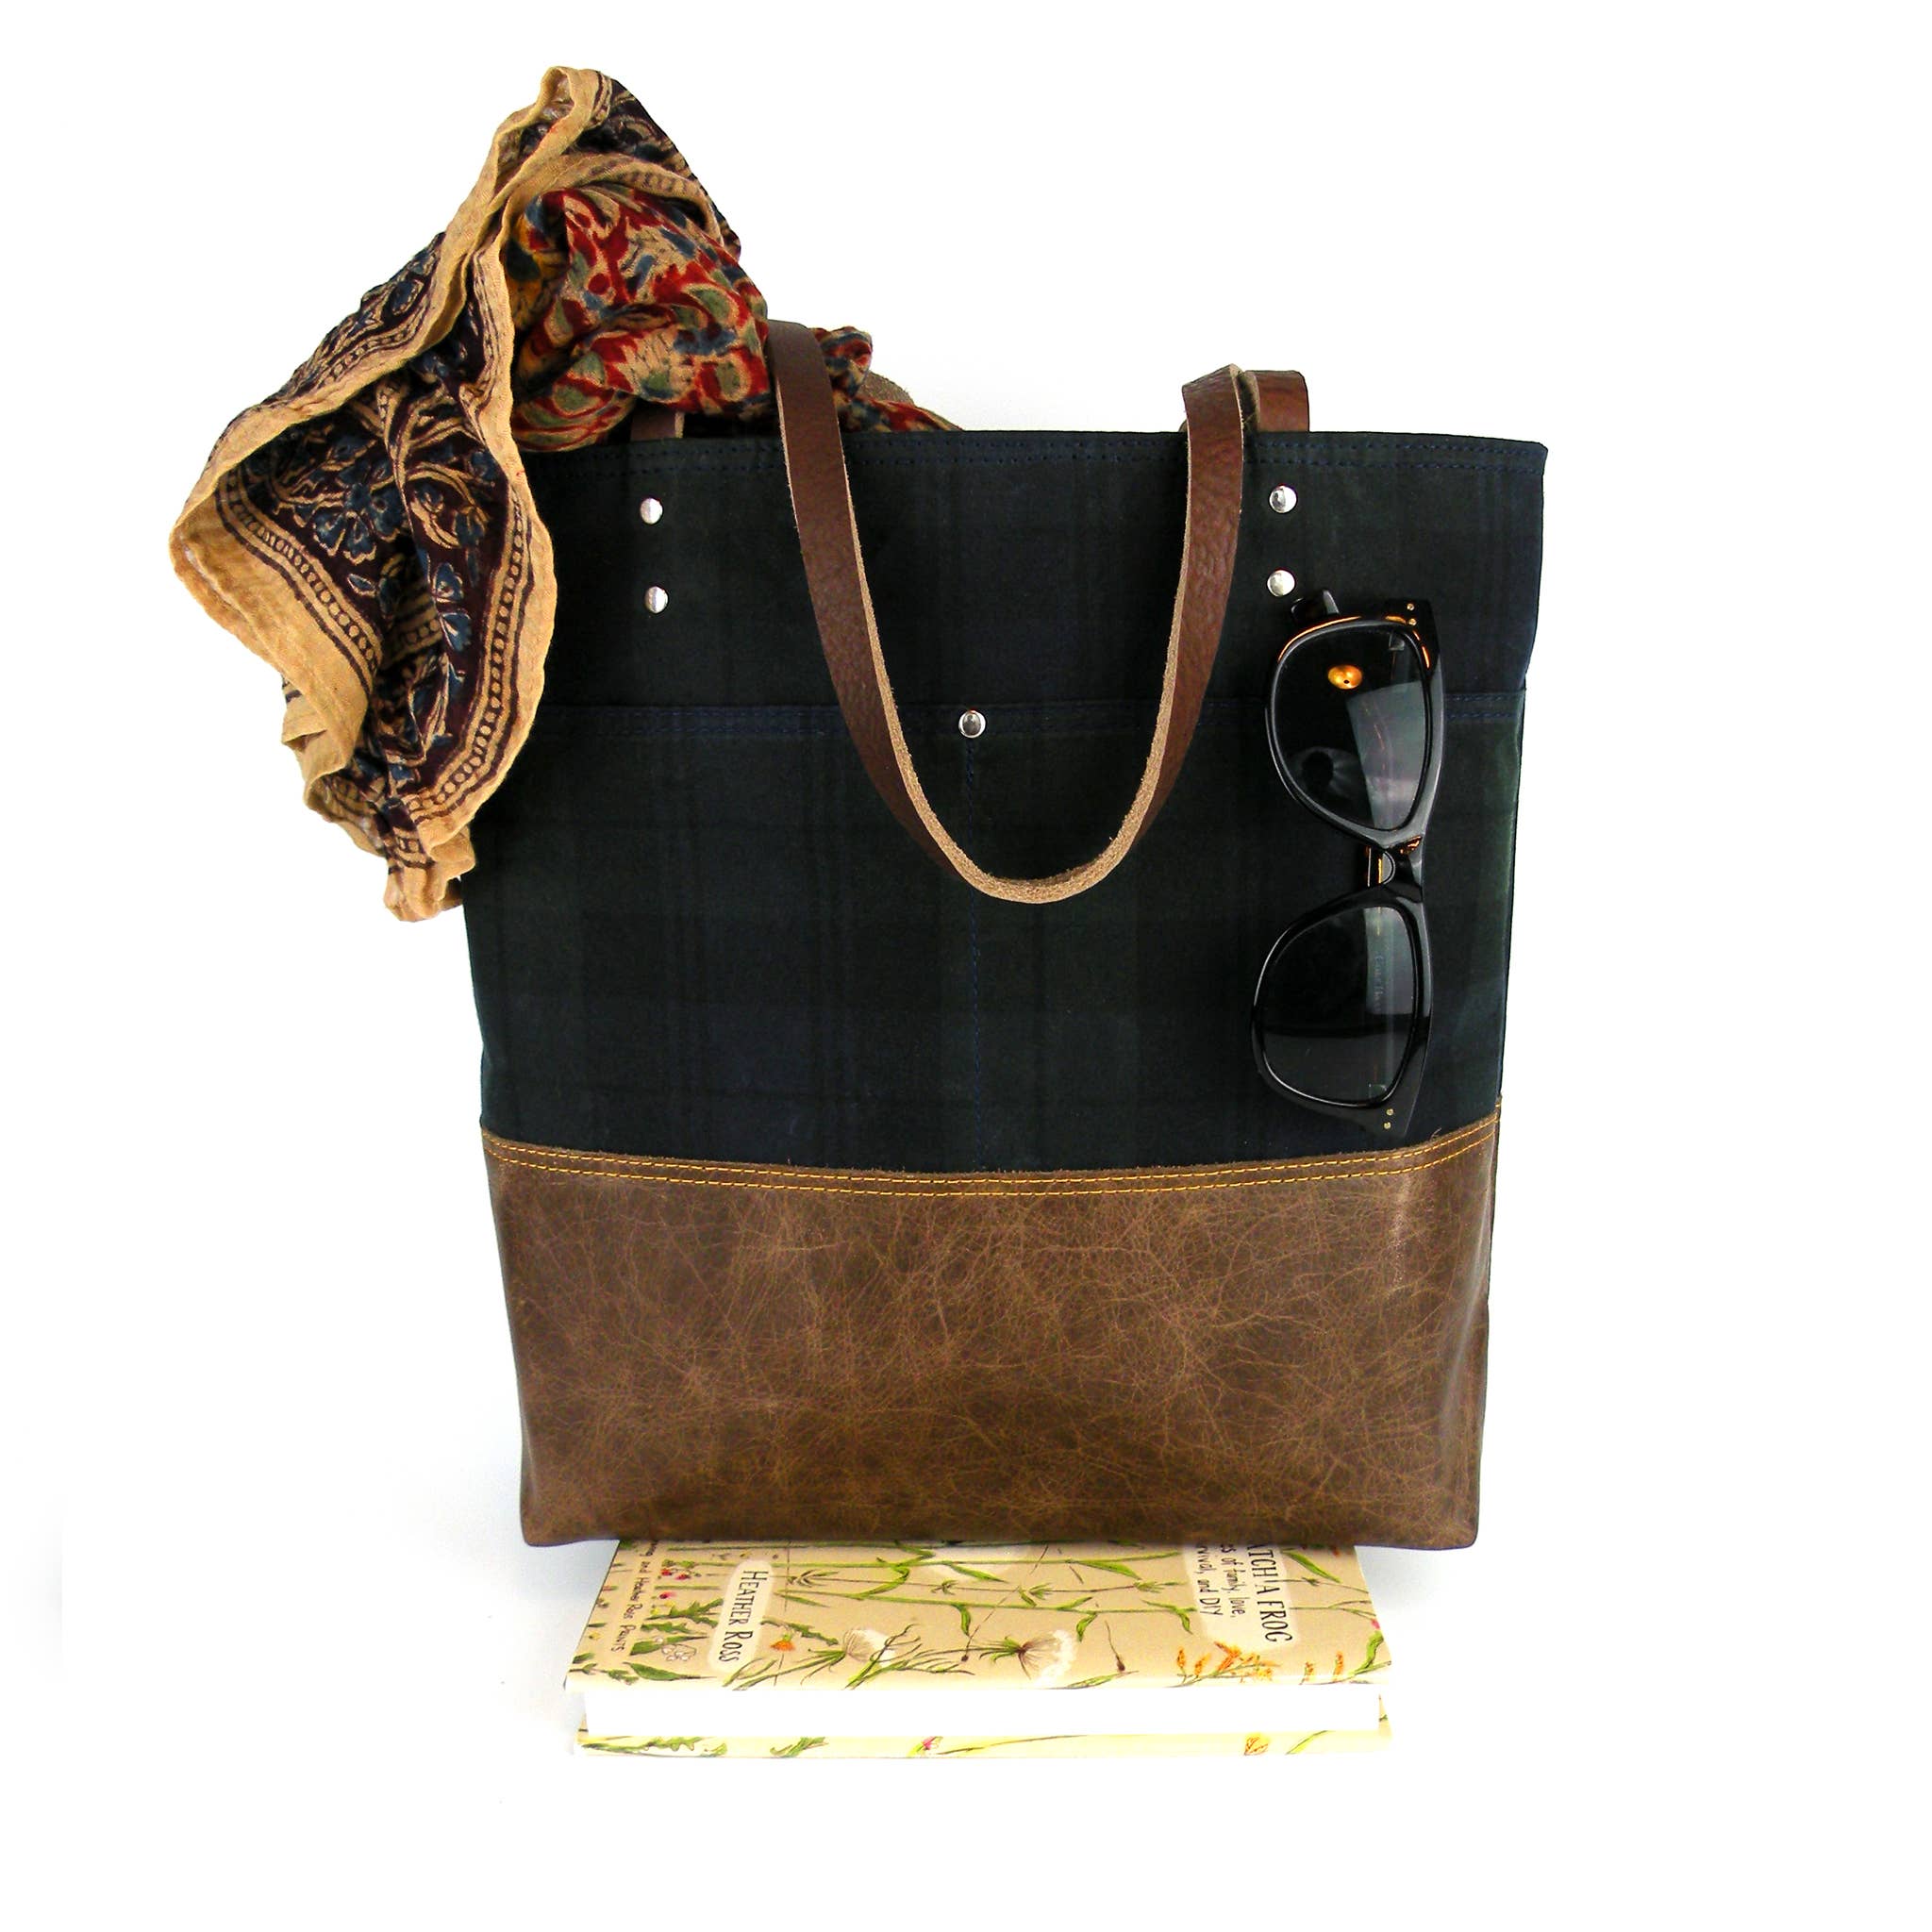 Urban Tote in black watch Plaid & Distressed Leather